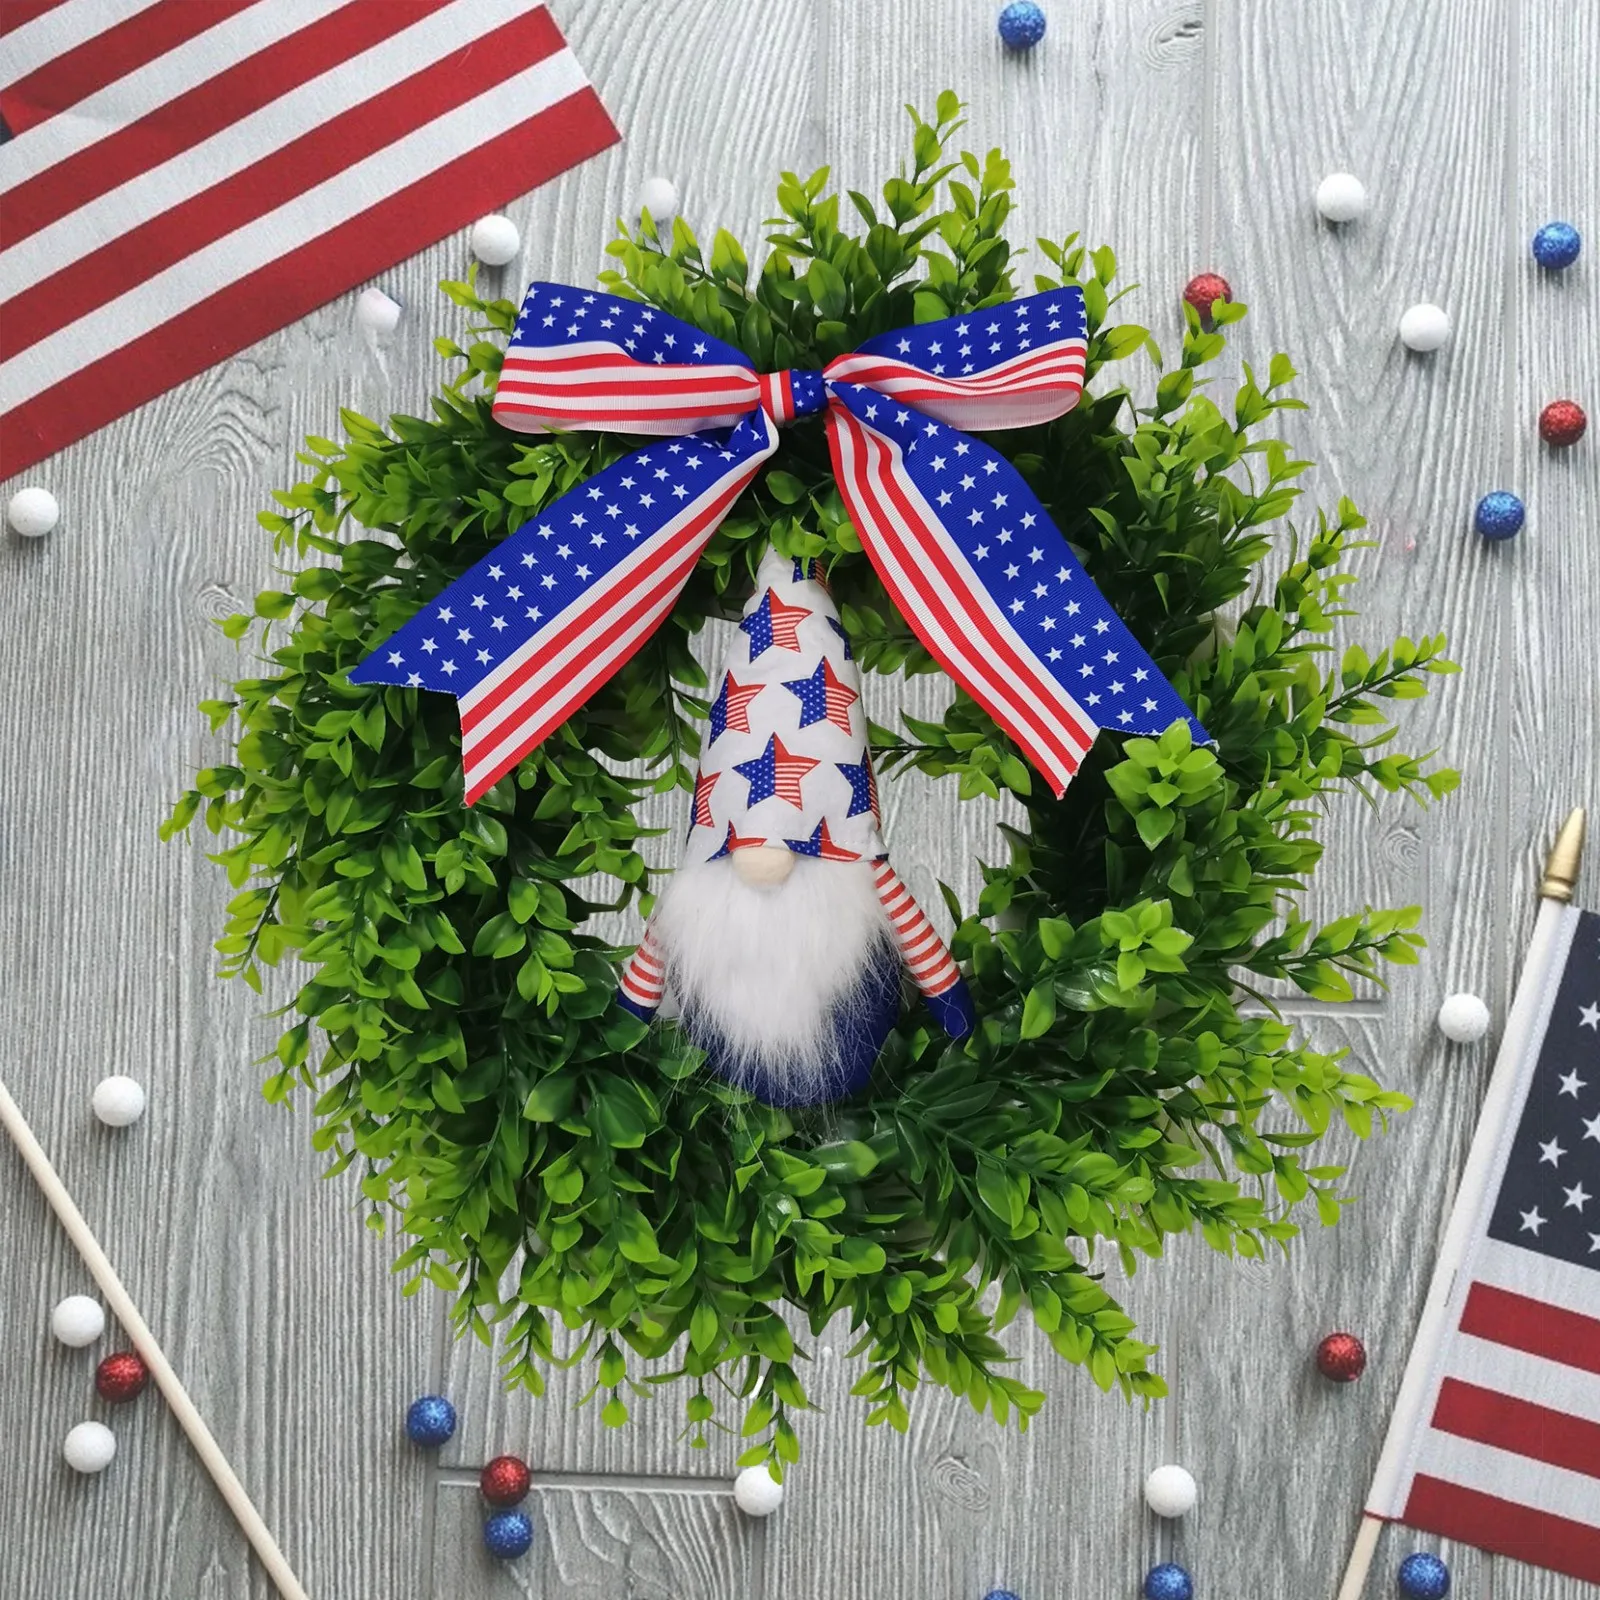 

Patriotic Wreath Front Door Decorations 4th of July Independence Day American Flag Wreath USA Garland Hanging Decor Veterans Day